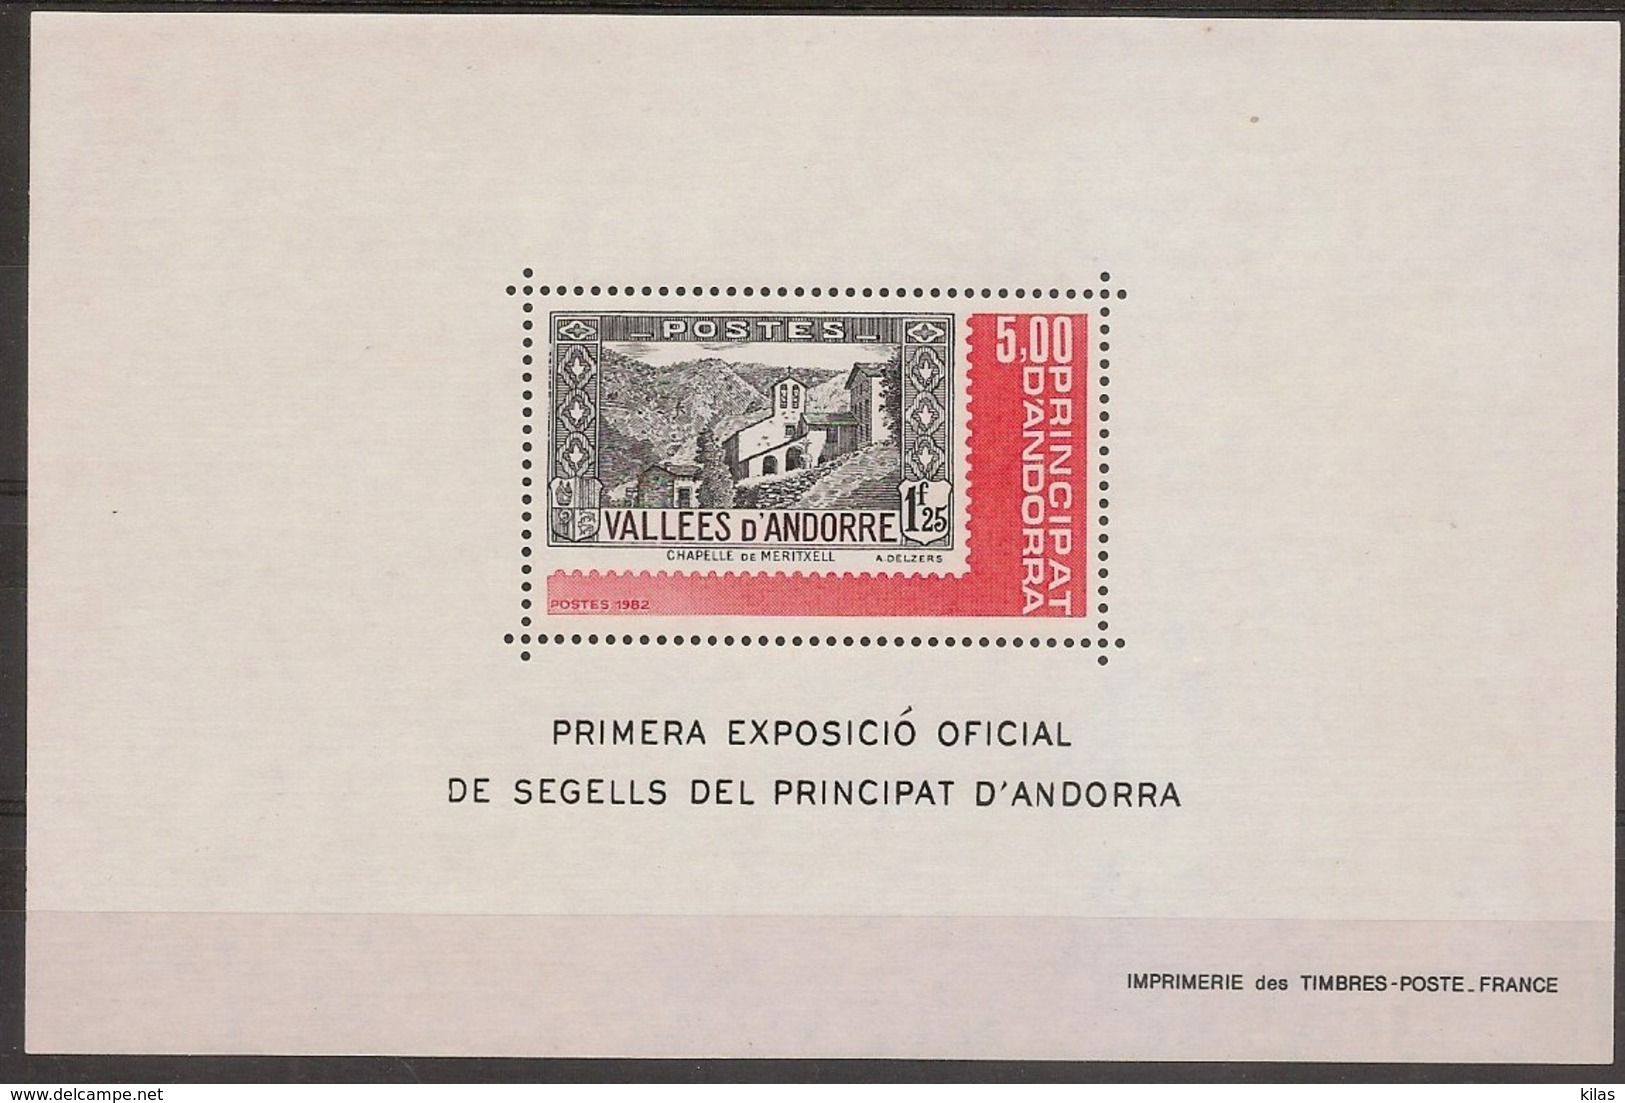 ANDORRA FRENCH 1982, Stamp Exposition - Blocks & Sheetlets